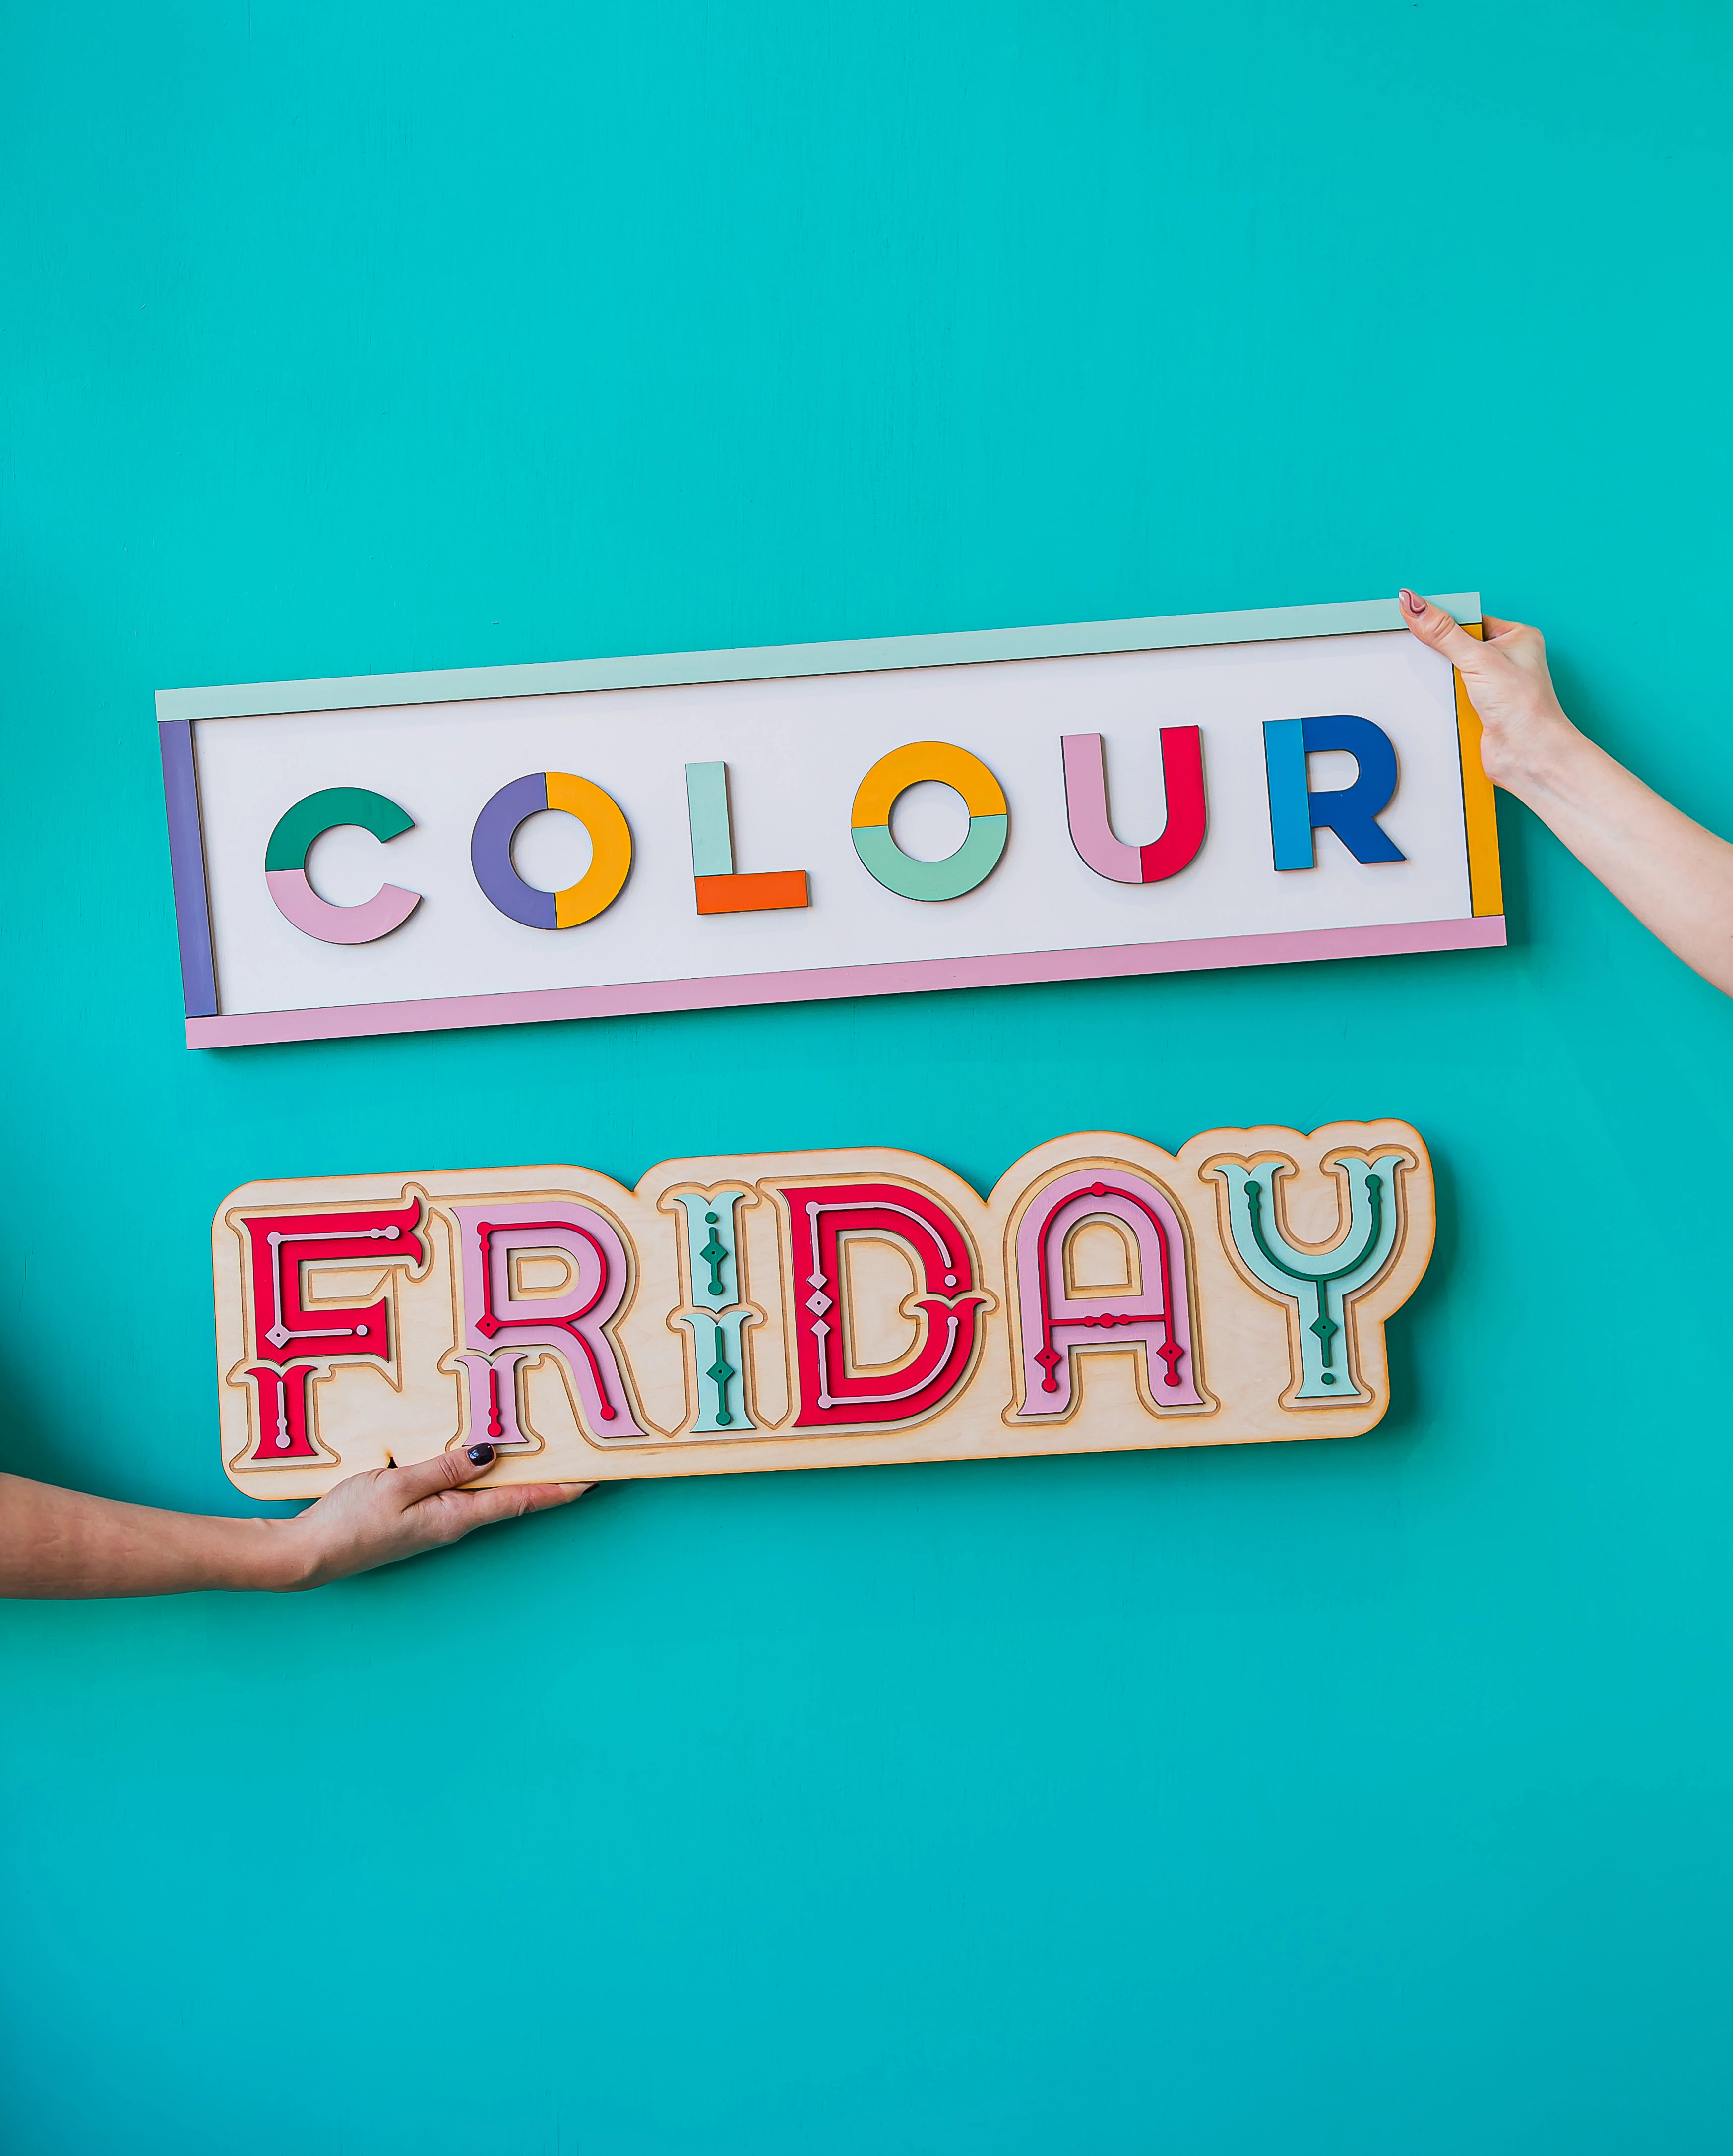 Colour friday sign